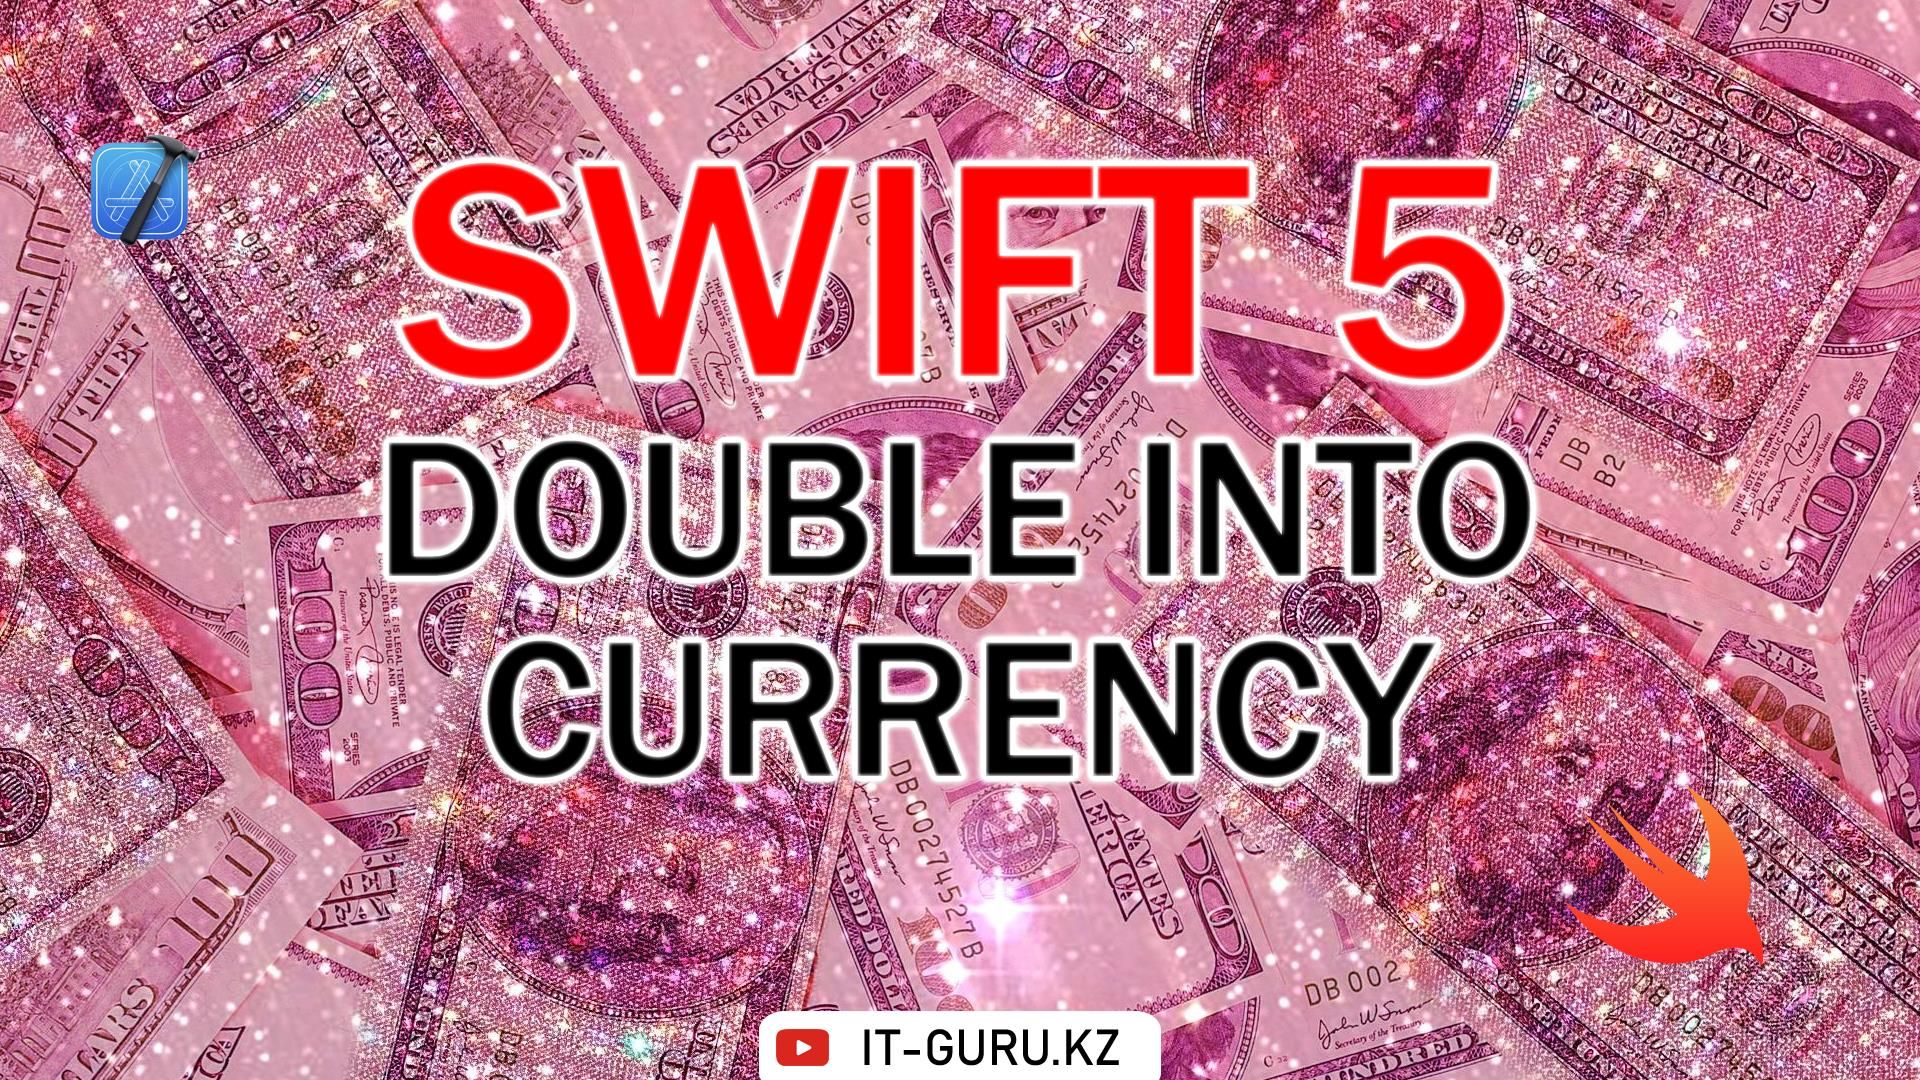 How to format a Double into Currency in Swift 5